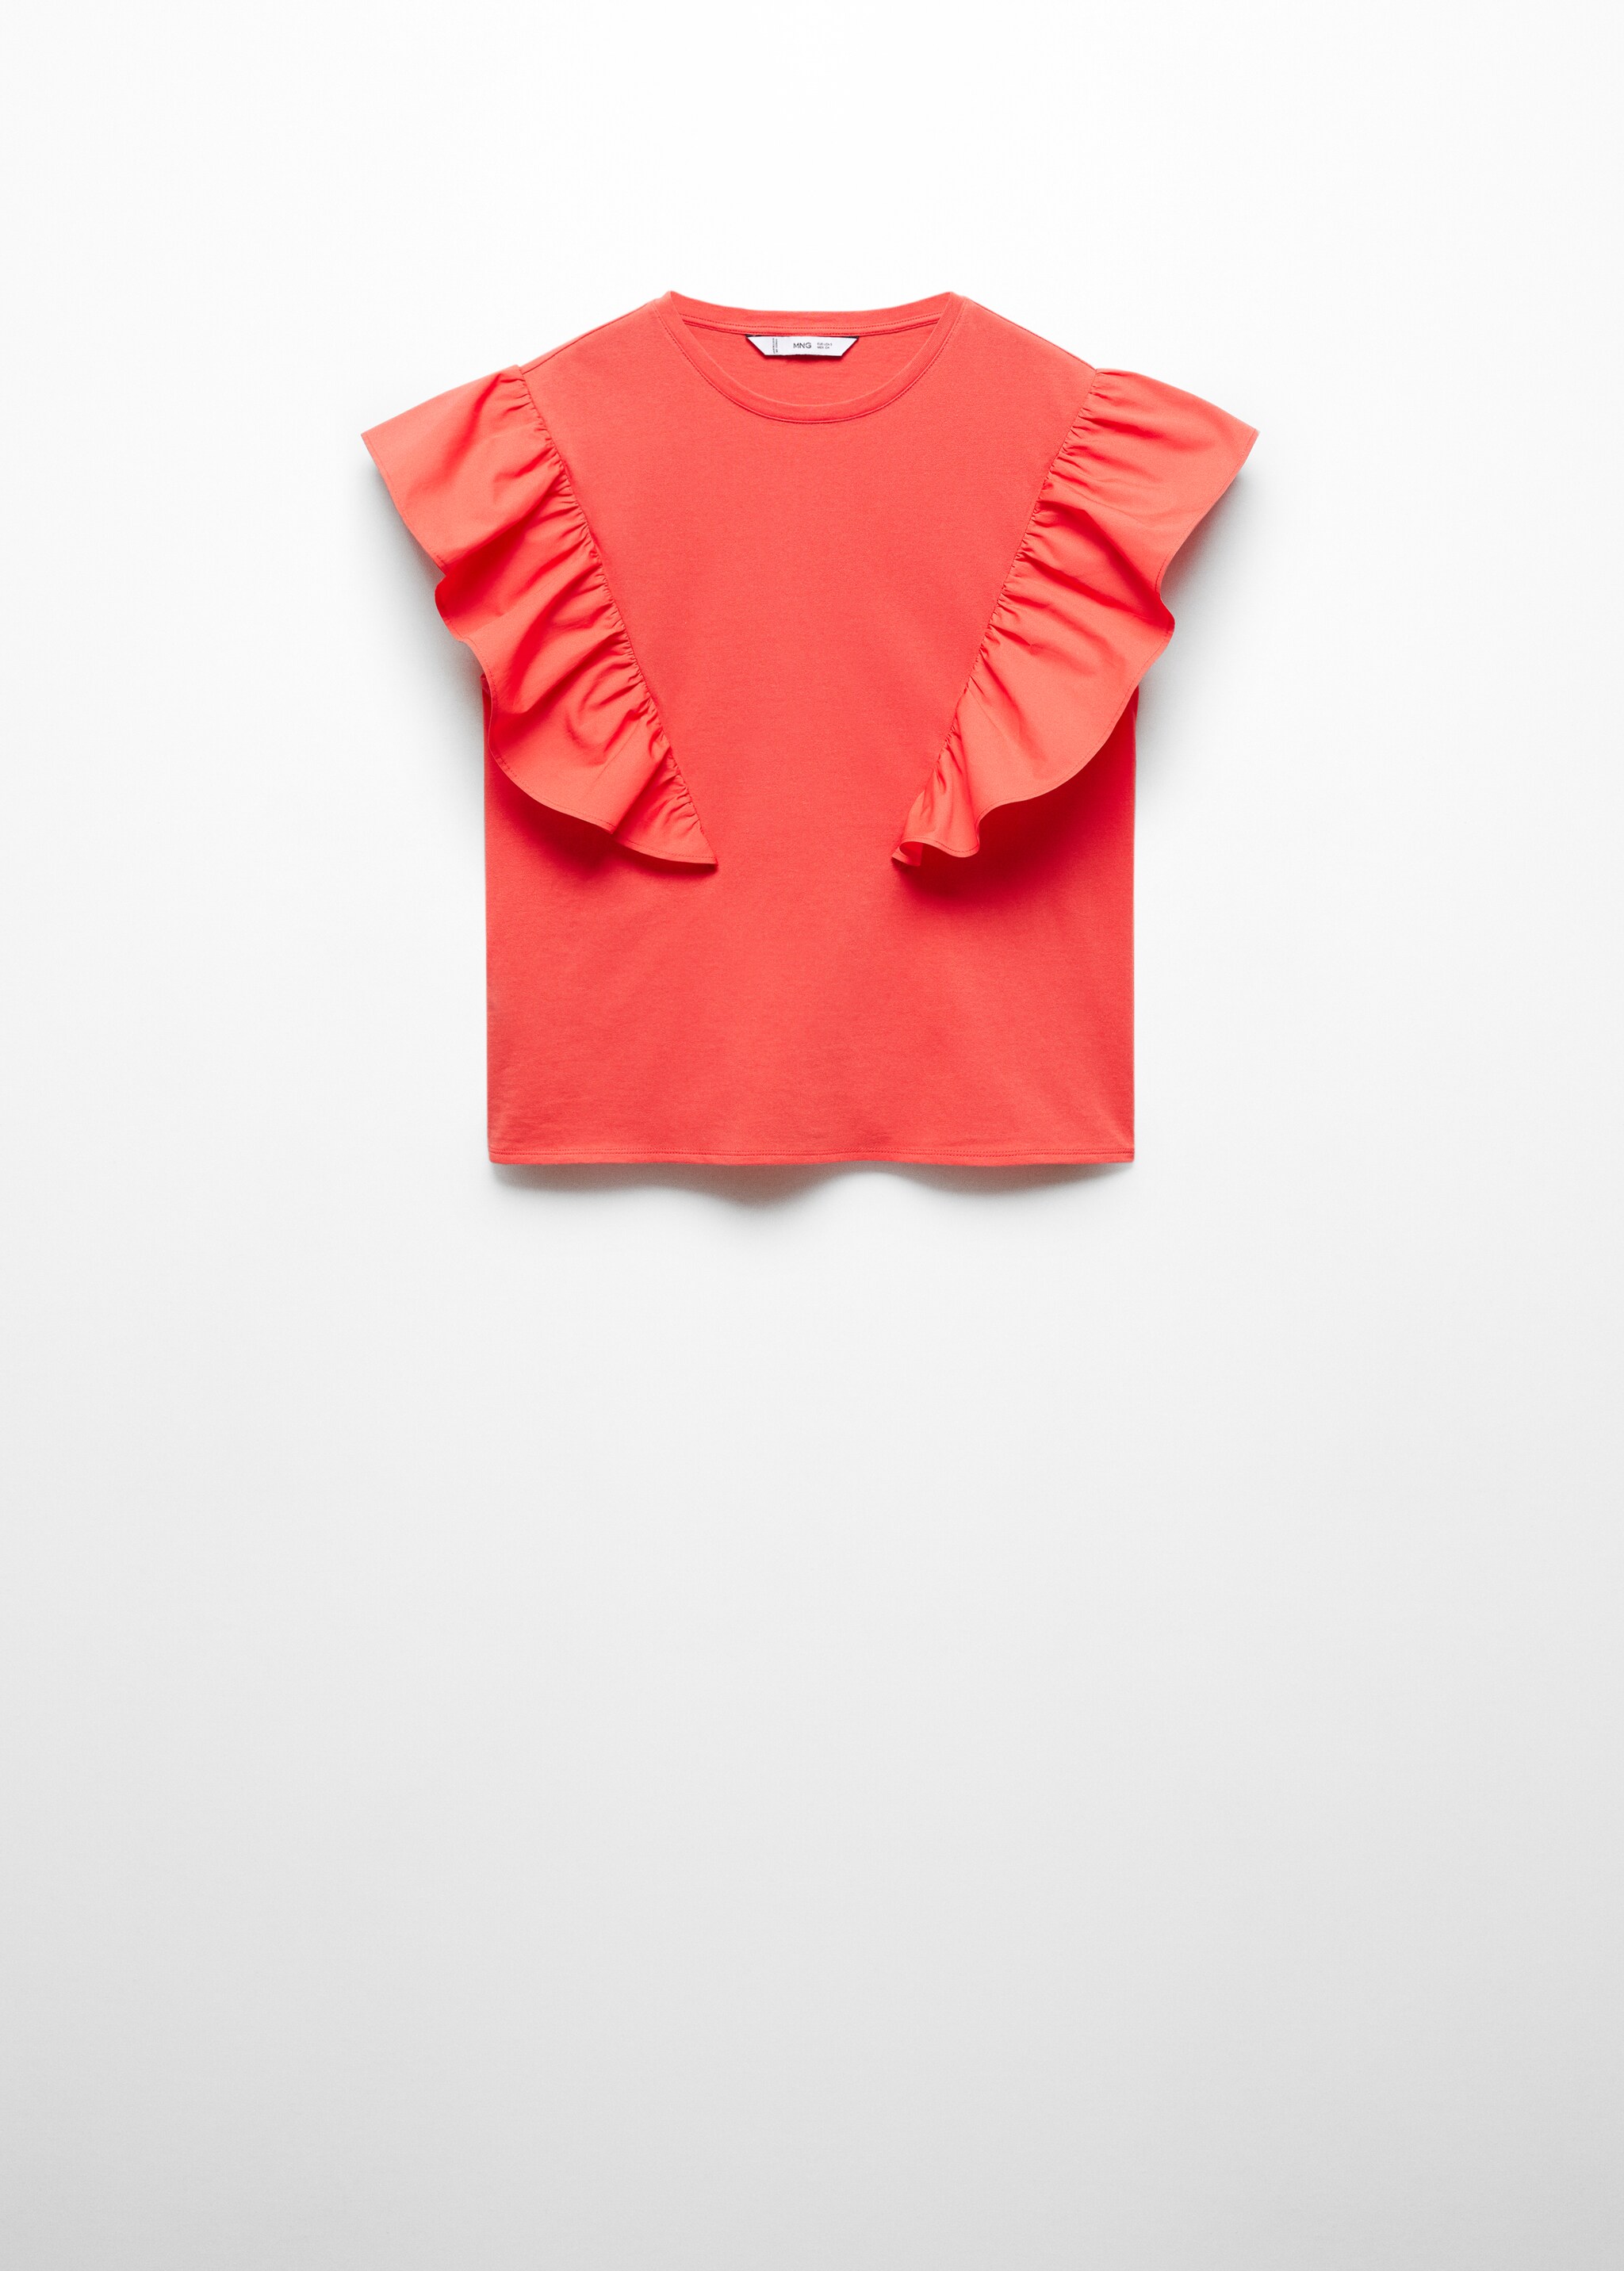 100% cotton t-shirt with ruffles - Article without model